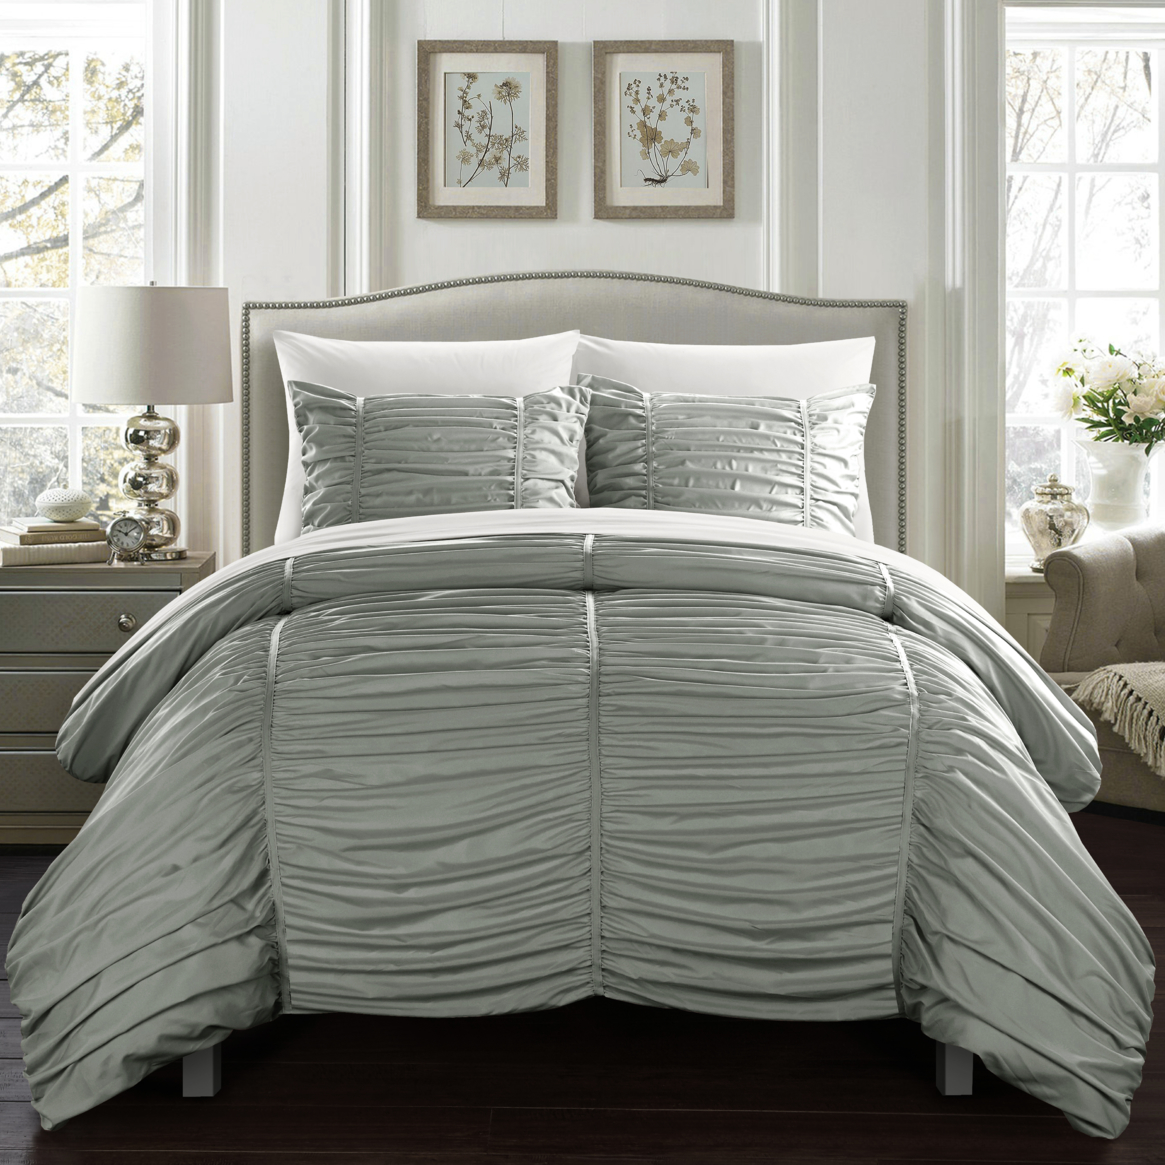 Kleia 7 Or 5 Piece Comforter Set Contemporary Striped Ruched Ruffled Design Bed In A Bag - Grey, King